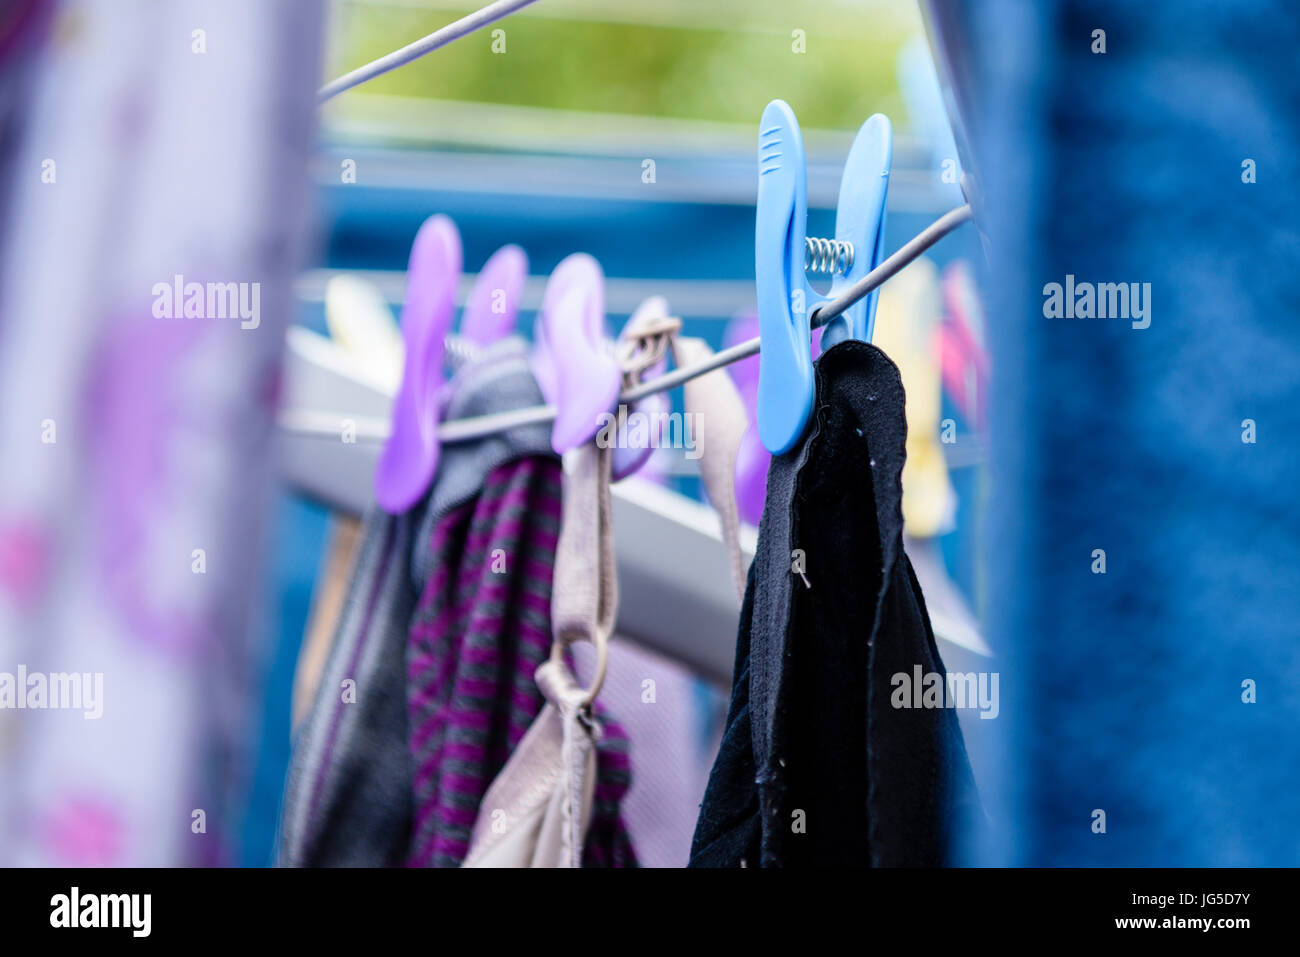 Clothes hanging out to dry in the sun on a washing line. Stock Photo